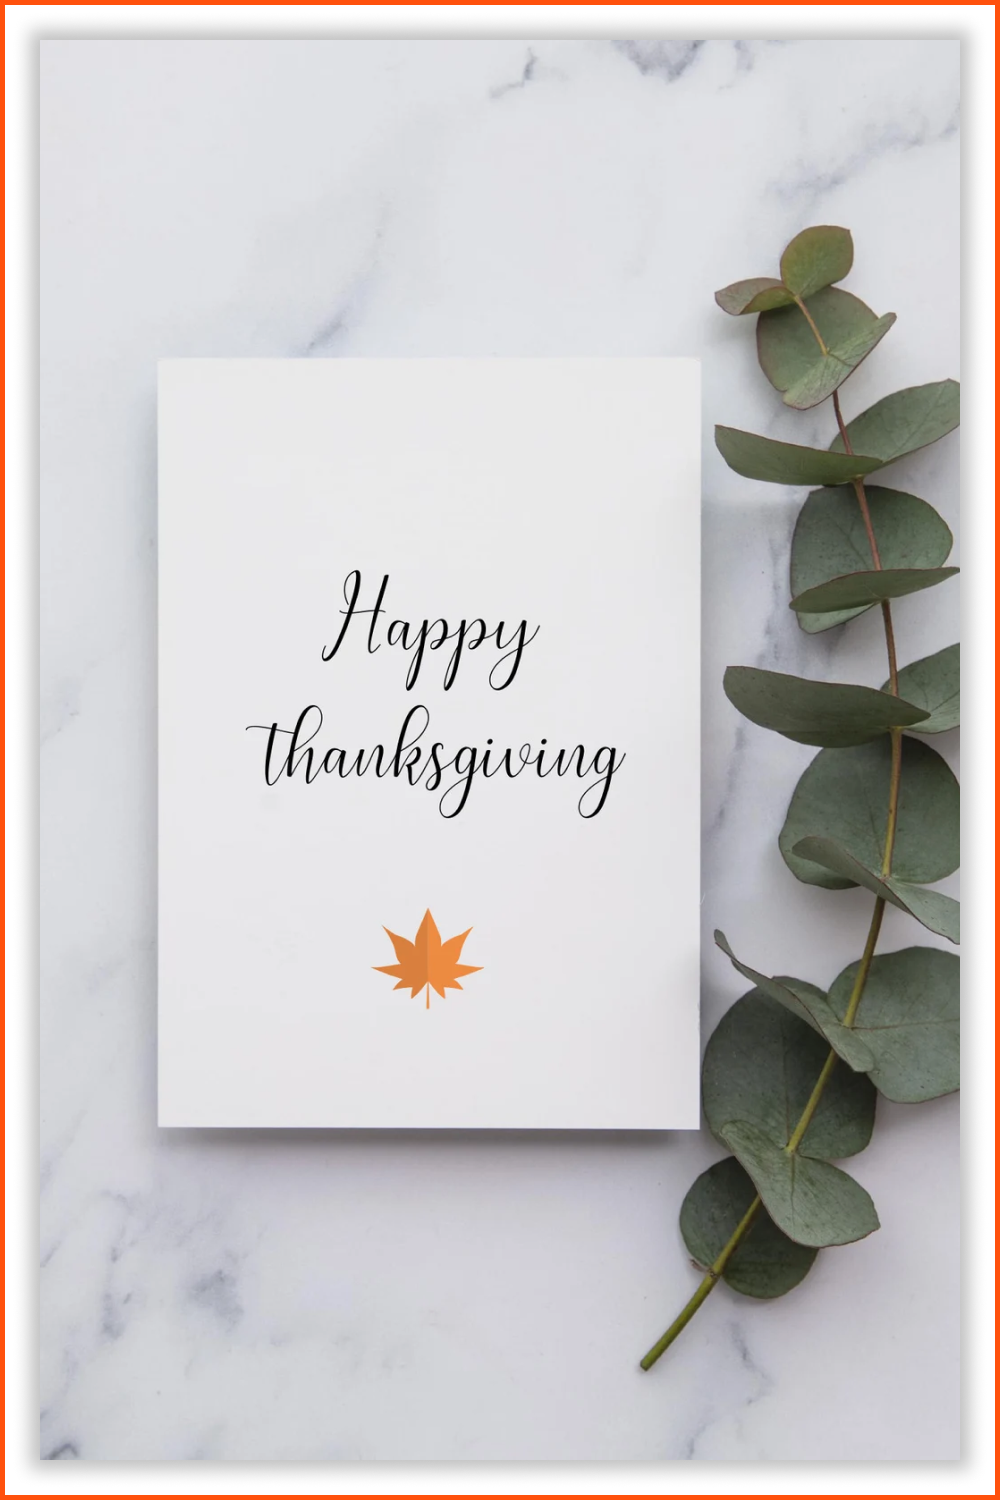 Thanksgiving card with yellow leaf on white background and green twig beside.